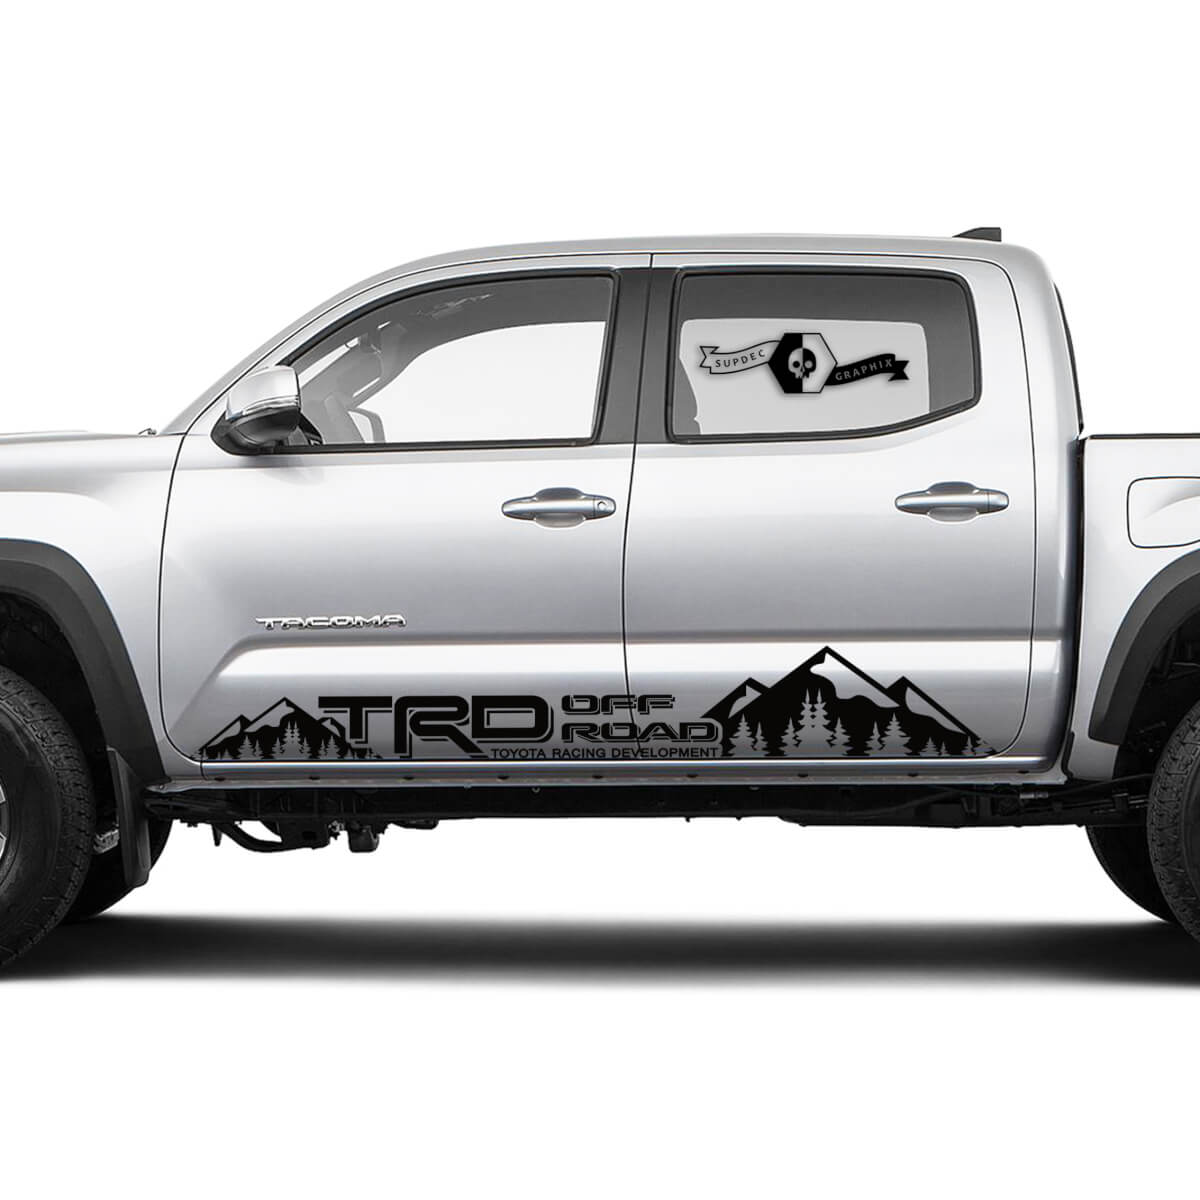 TRD TOYOTA Rocker Panel Mountain Forest stripes Decals Stickers for Tacoma Tundra 4Runner Hilux Doors